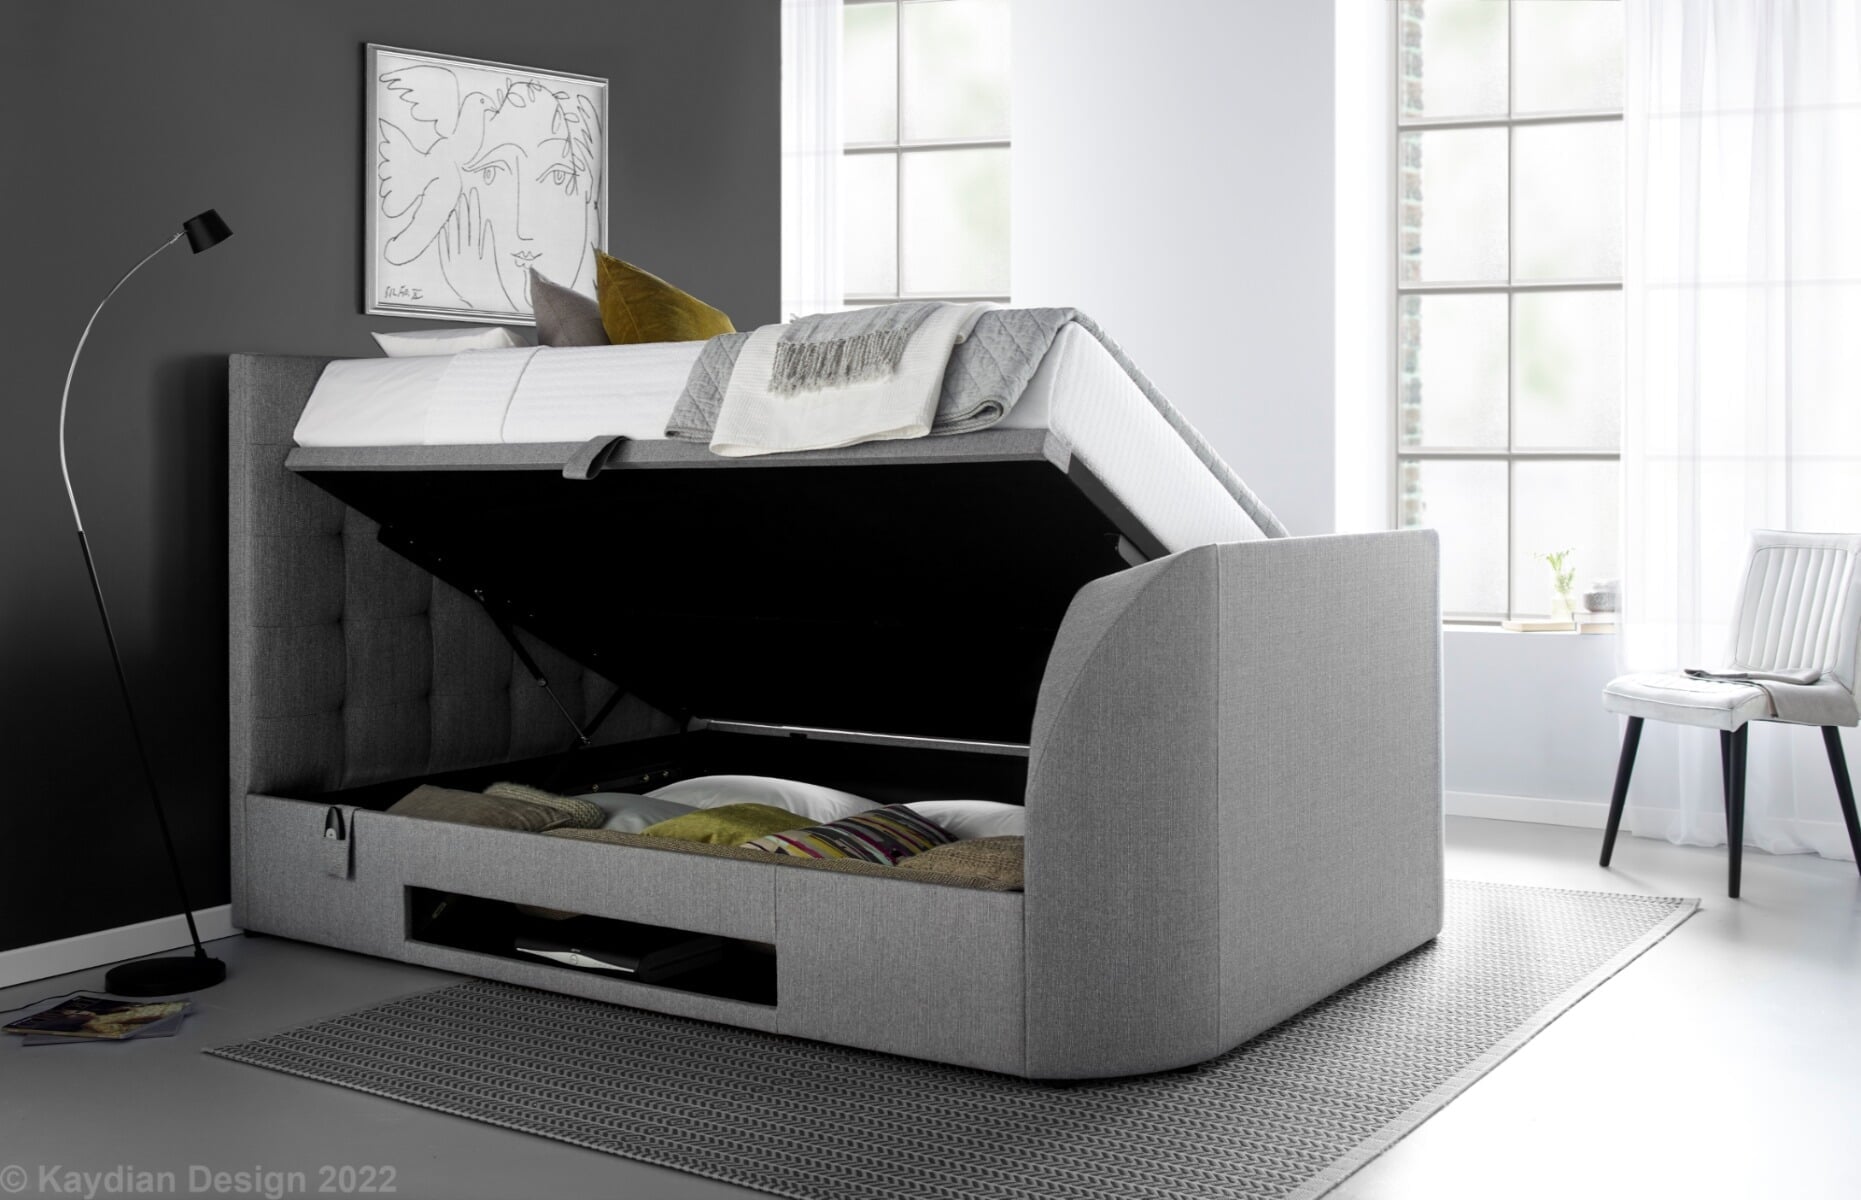 Super king Beds with Storage